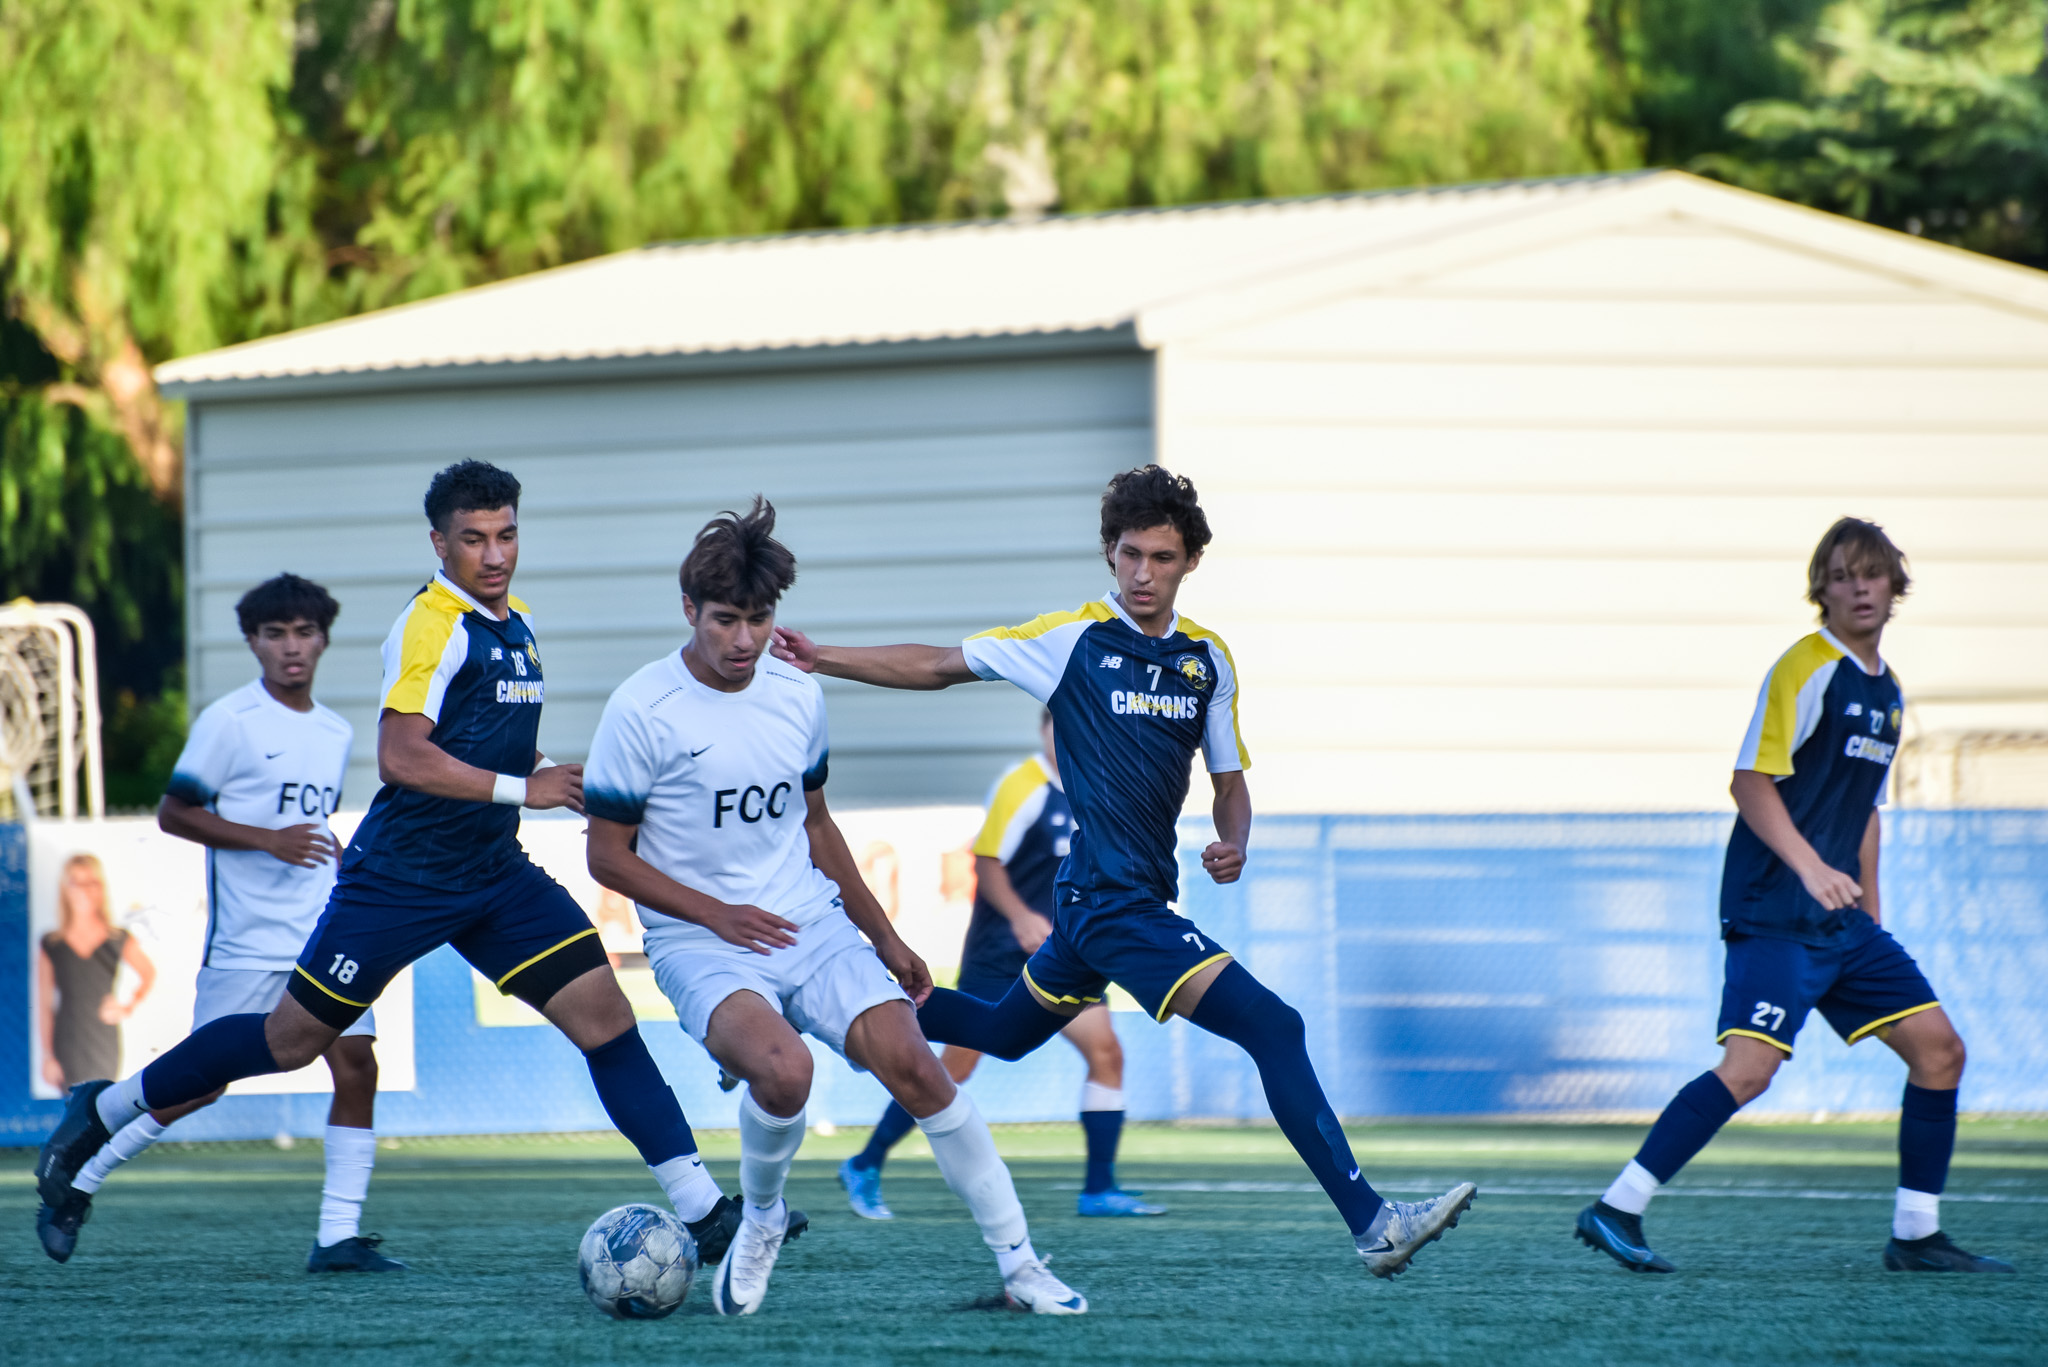 College of the Canyons men's soccer stock action image from game vs. Fresno City College on Sept. 12.